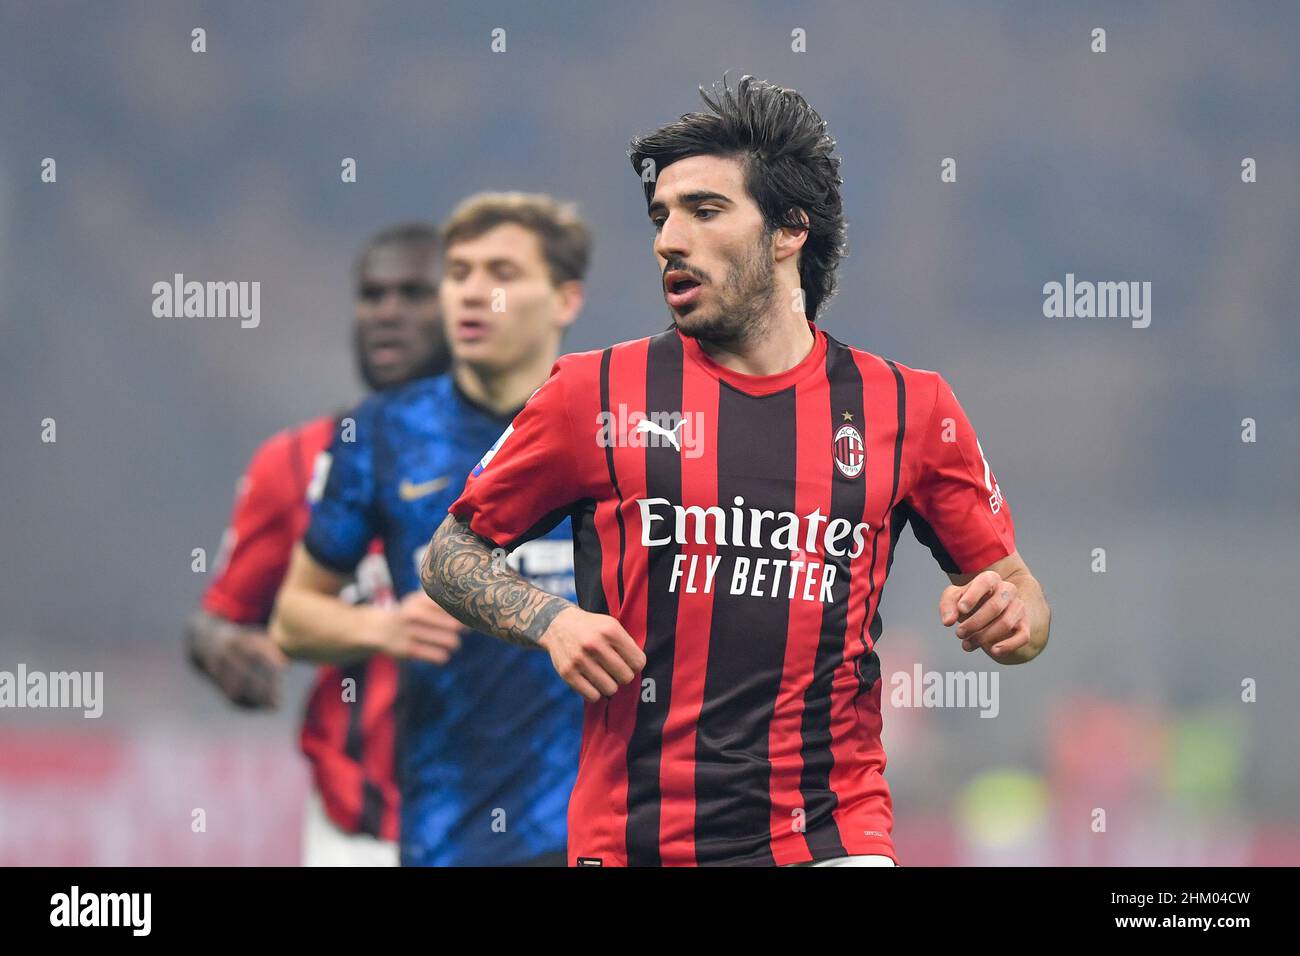 Milano, Italy. 05th Feb, 2022. Sandro Tonali (8) of AC Milan seen in the Serie A match between and AC Milan at Giuseppe Meazza in Milano. (Photo Credit: Gonzales Photo/Alamy Live